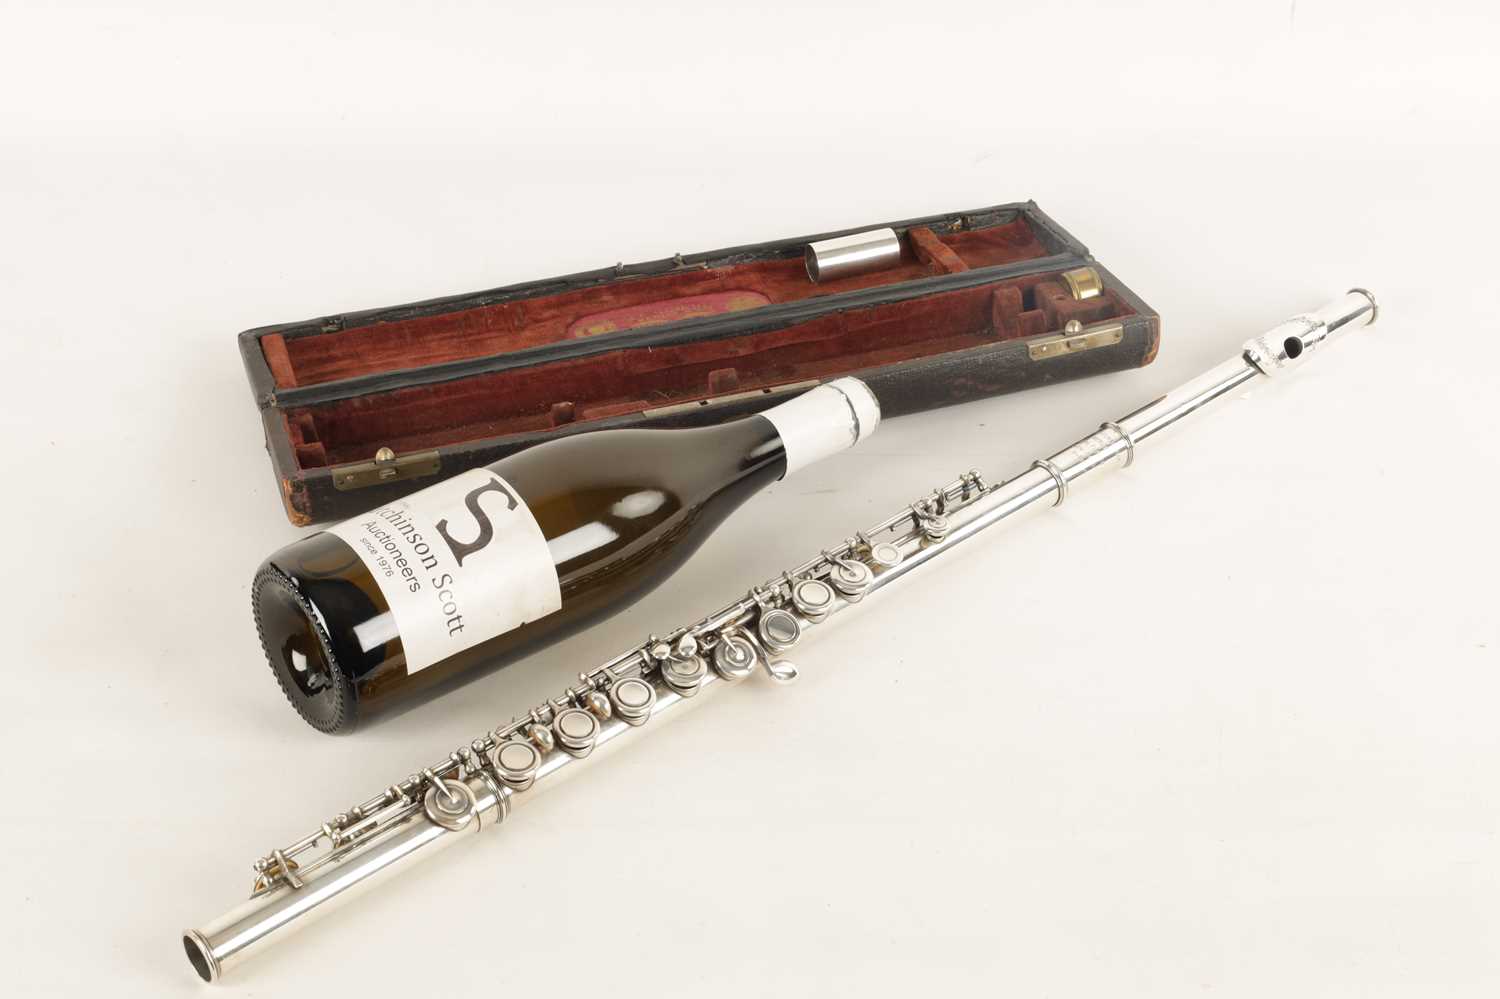 EMIL RITTERSHAUSEN NO 3400. A SILVER FLUTE WITH ENGRAVED LIP PLATE - Image 8 of 9